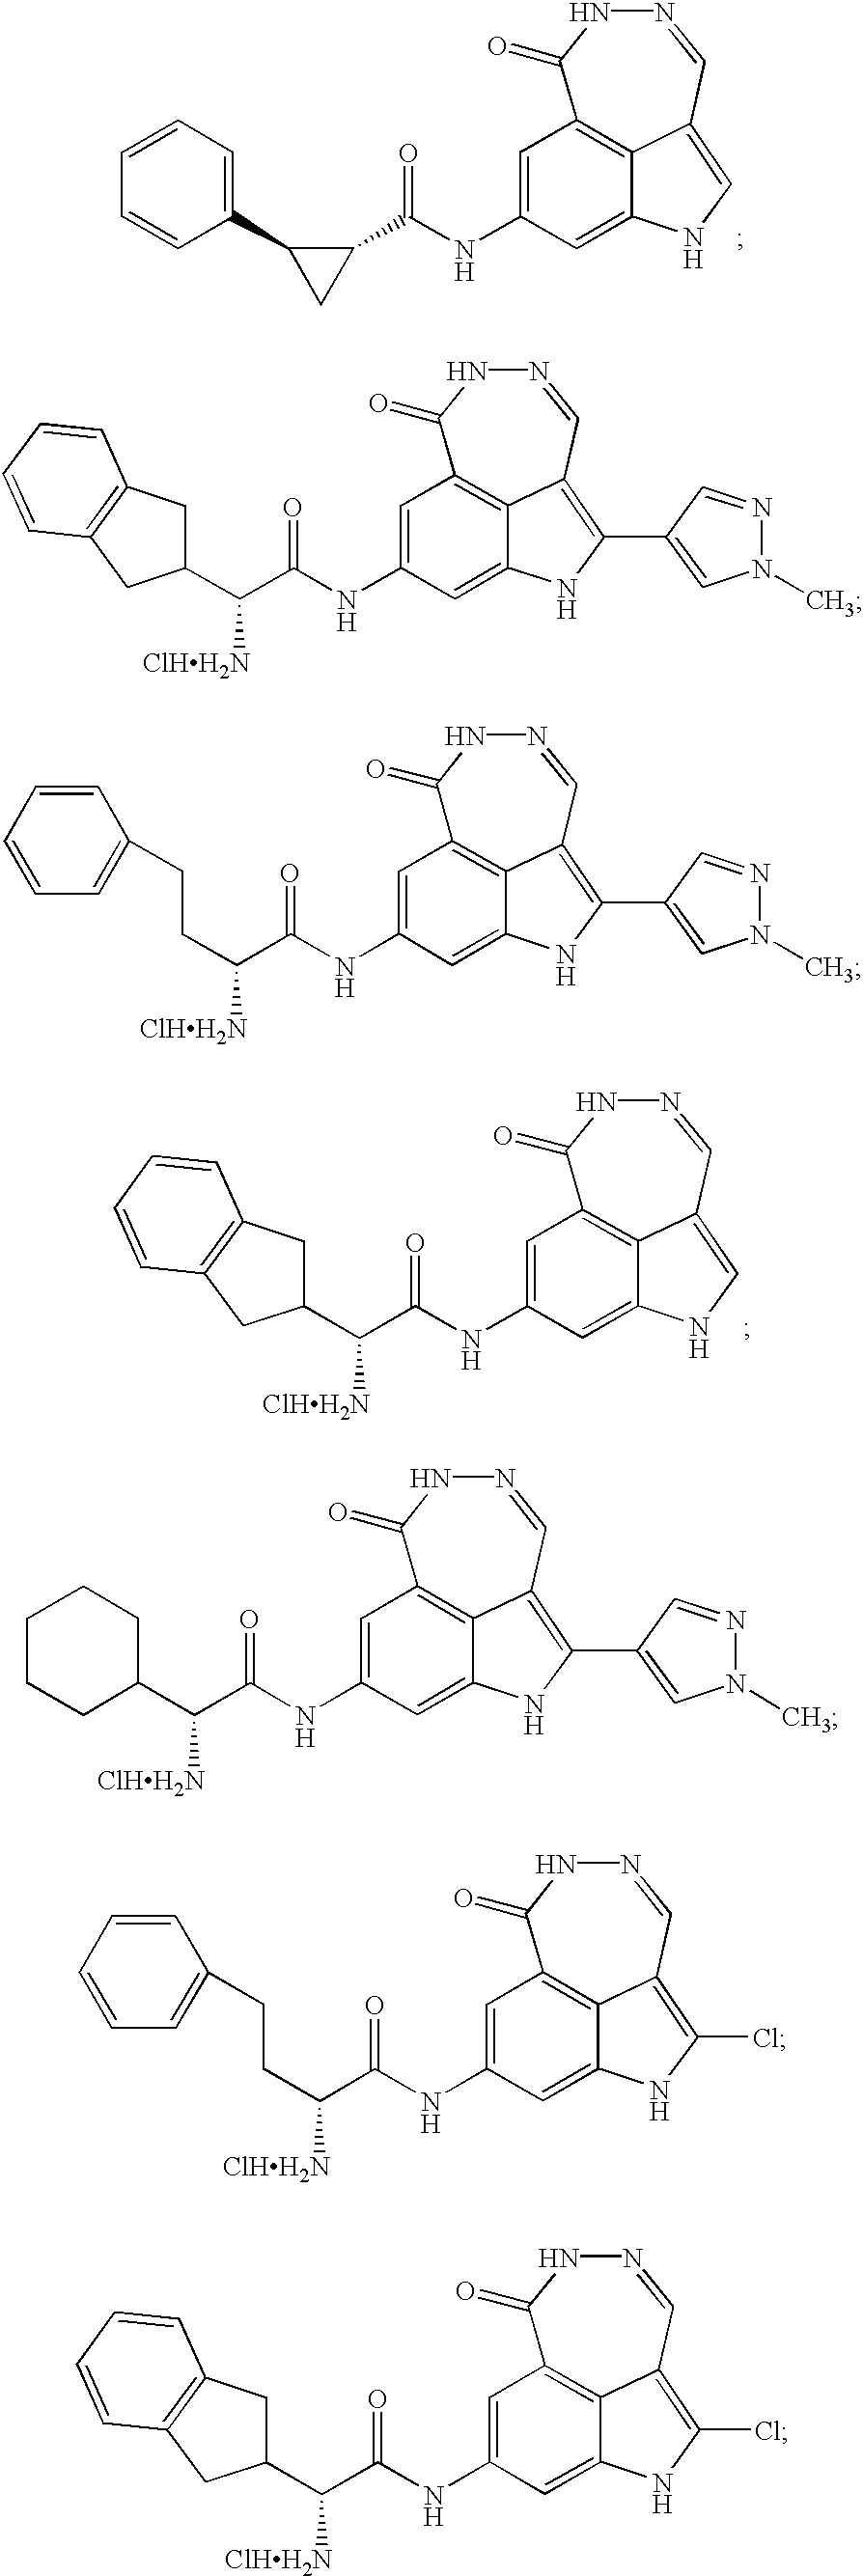 Tricyclic compounds protein kinase inhibitors for enhancing the efficacy of anti-neoplastic agents and radiation therapy